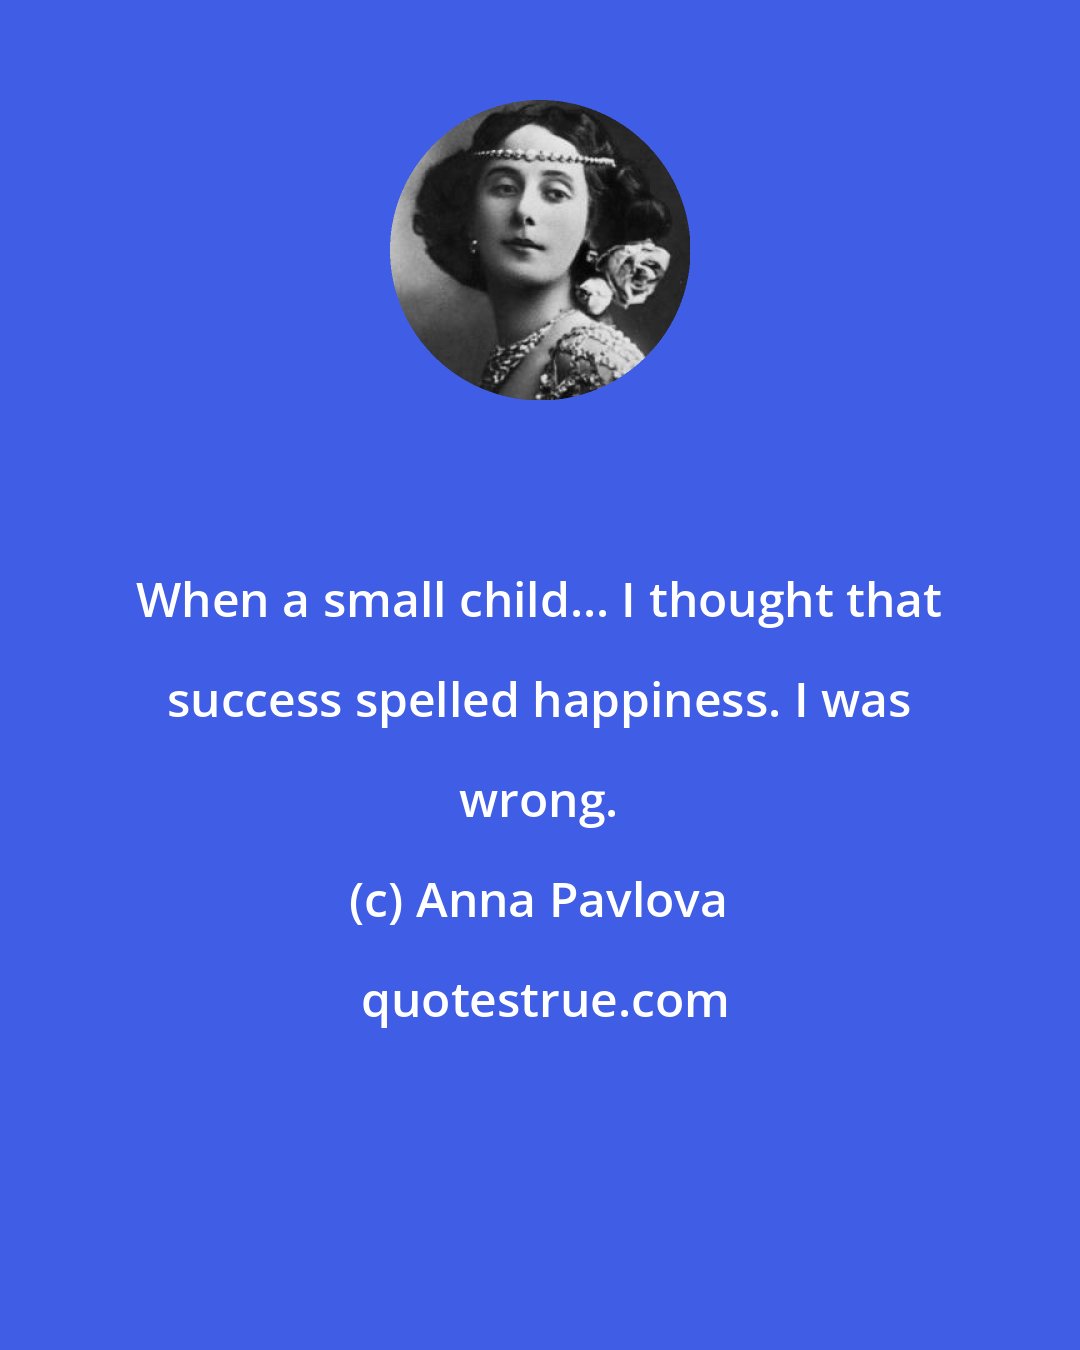 Anna Pavlova: When a small child... I thought that success spelled happiness. I was wrong.